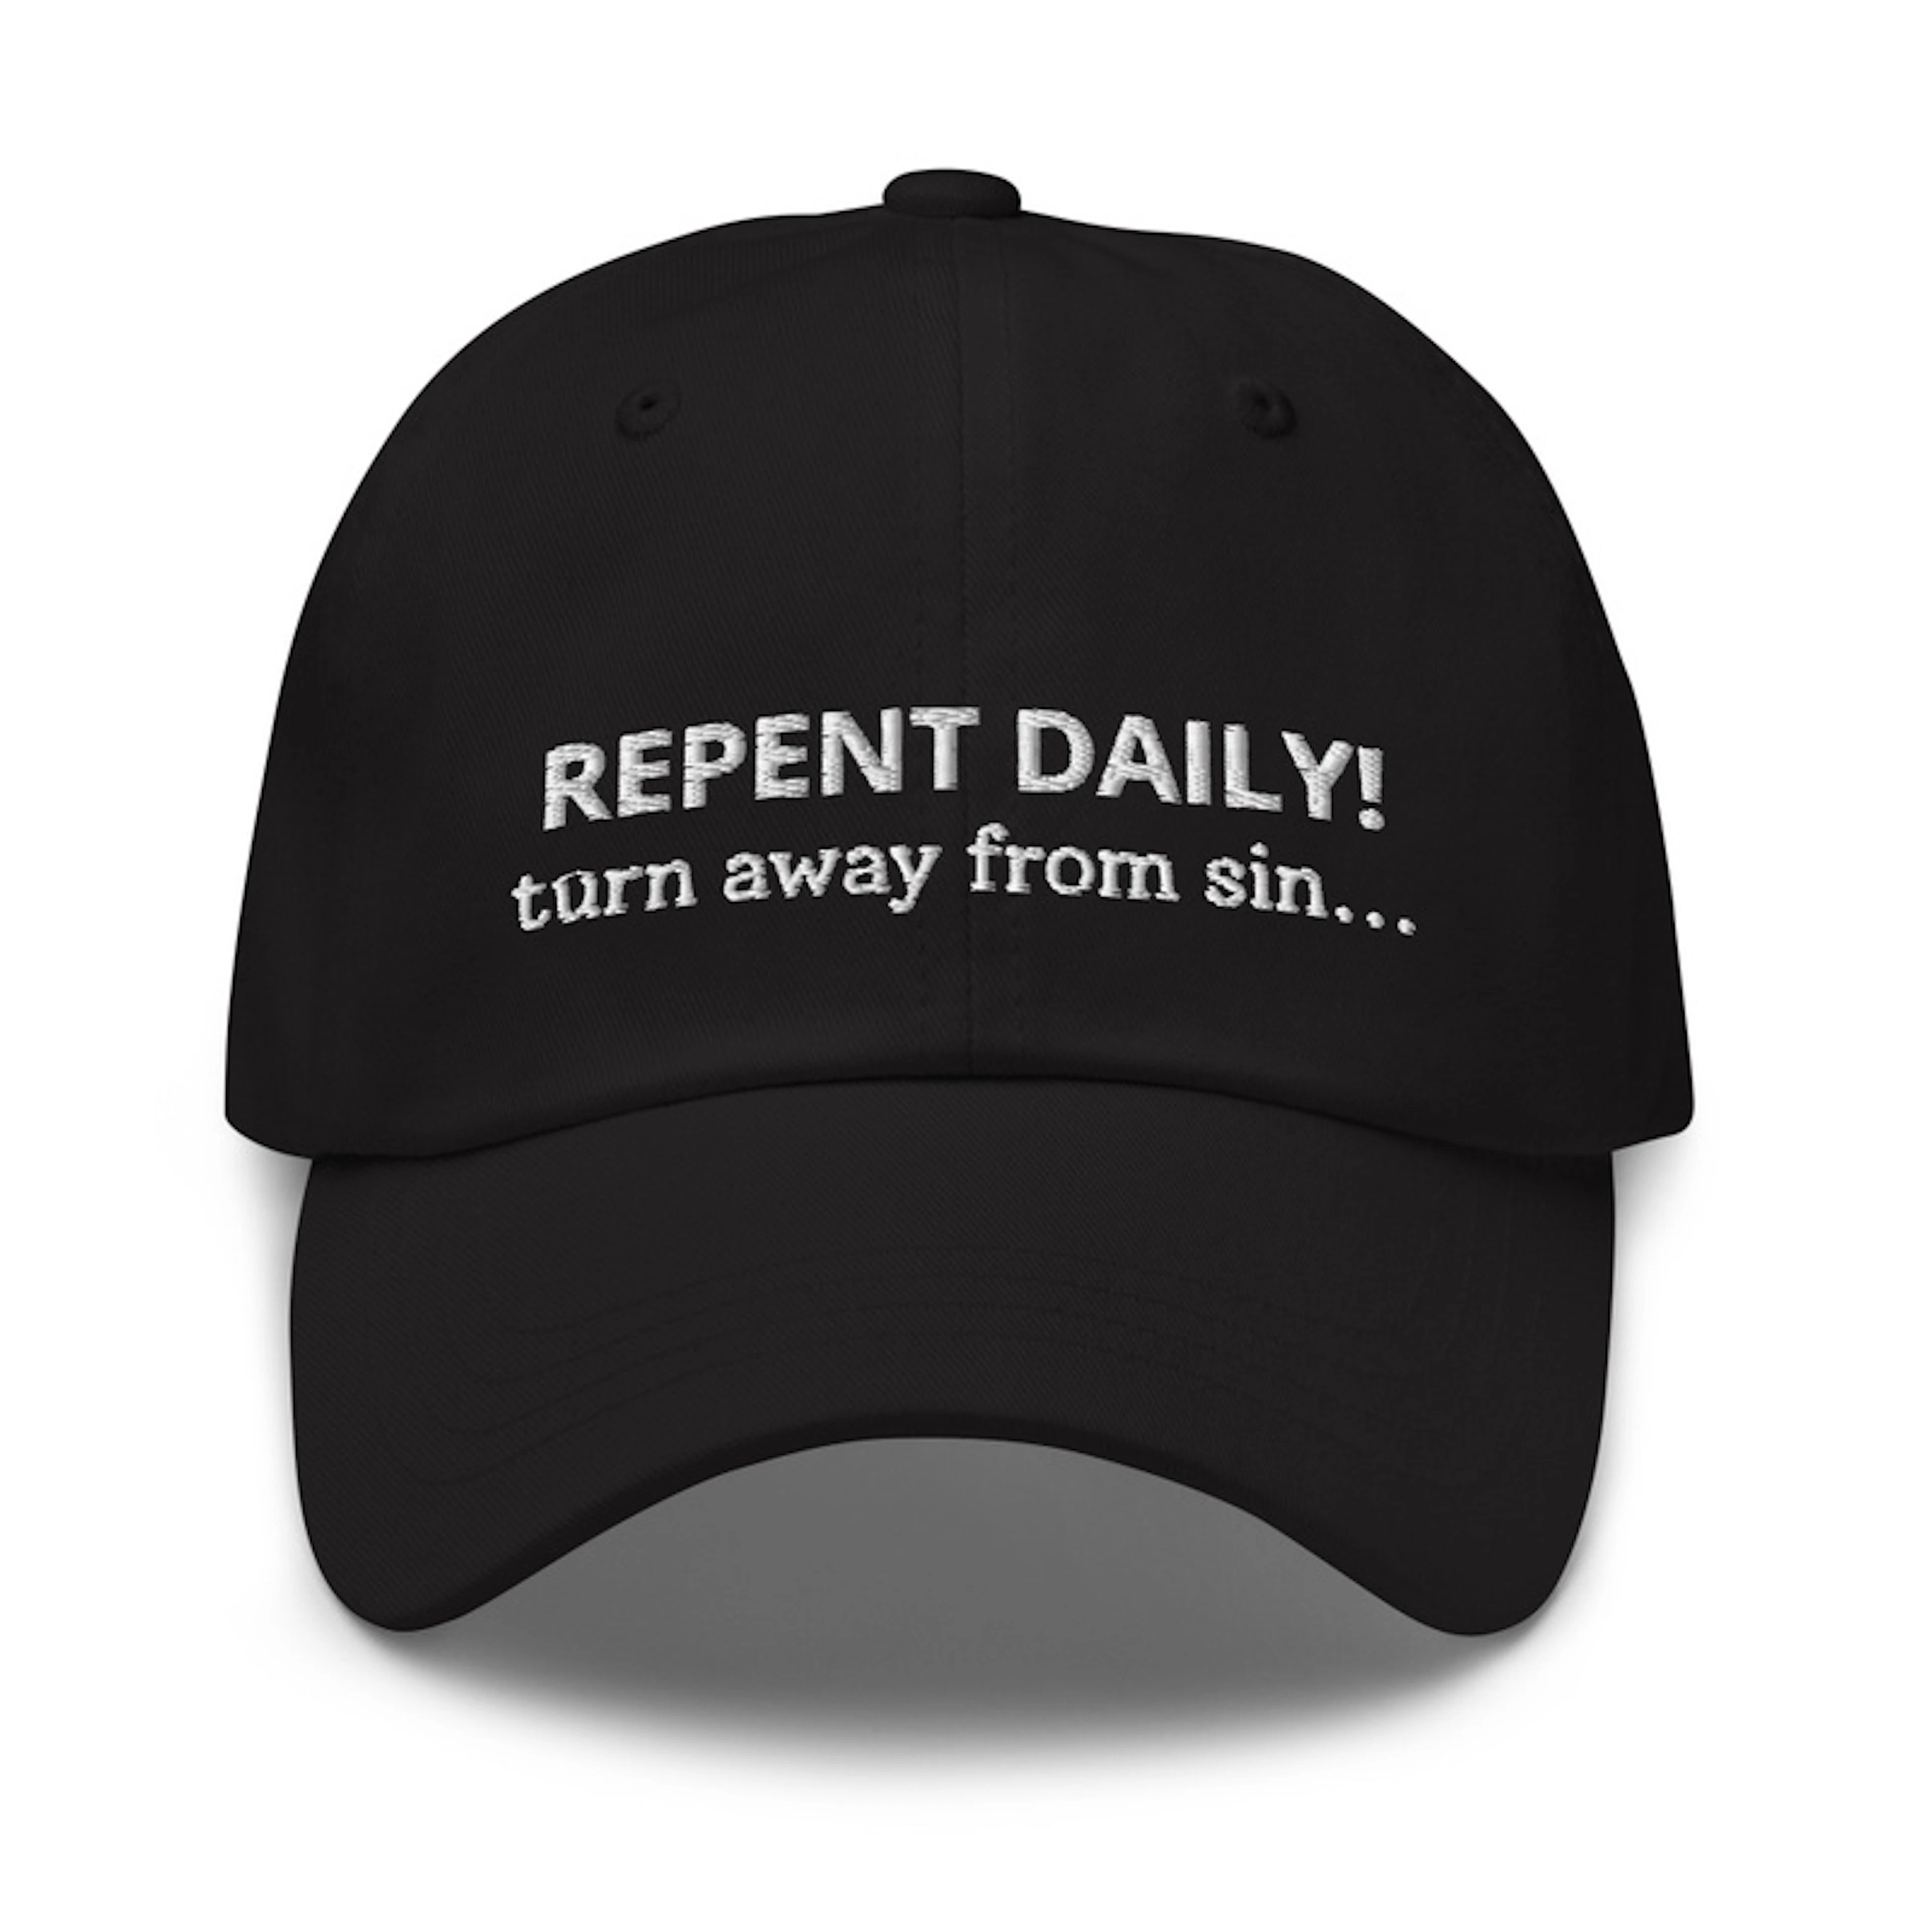 Repent Daily (turn away from sin...)